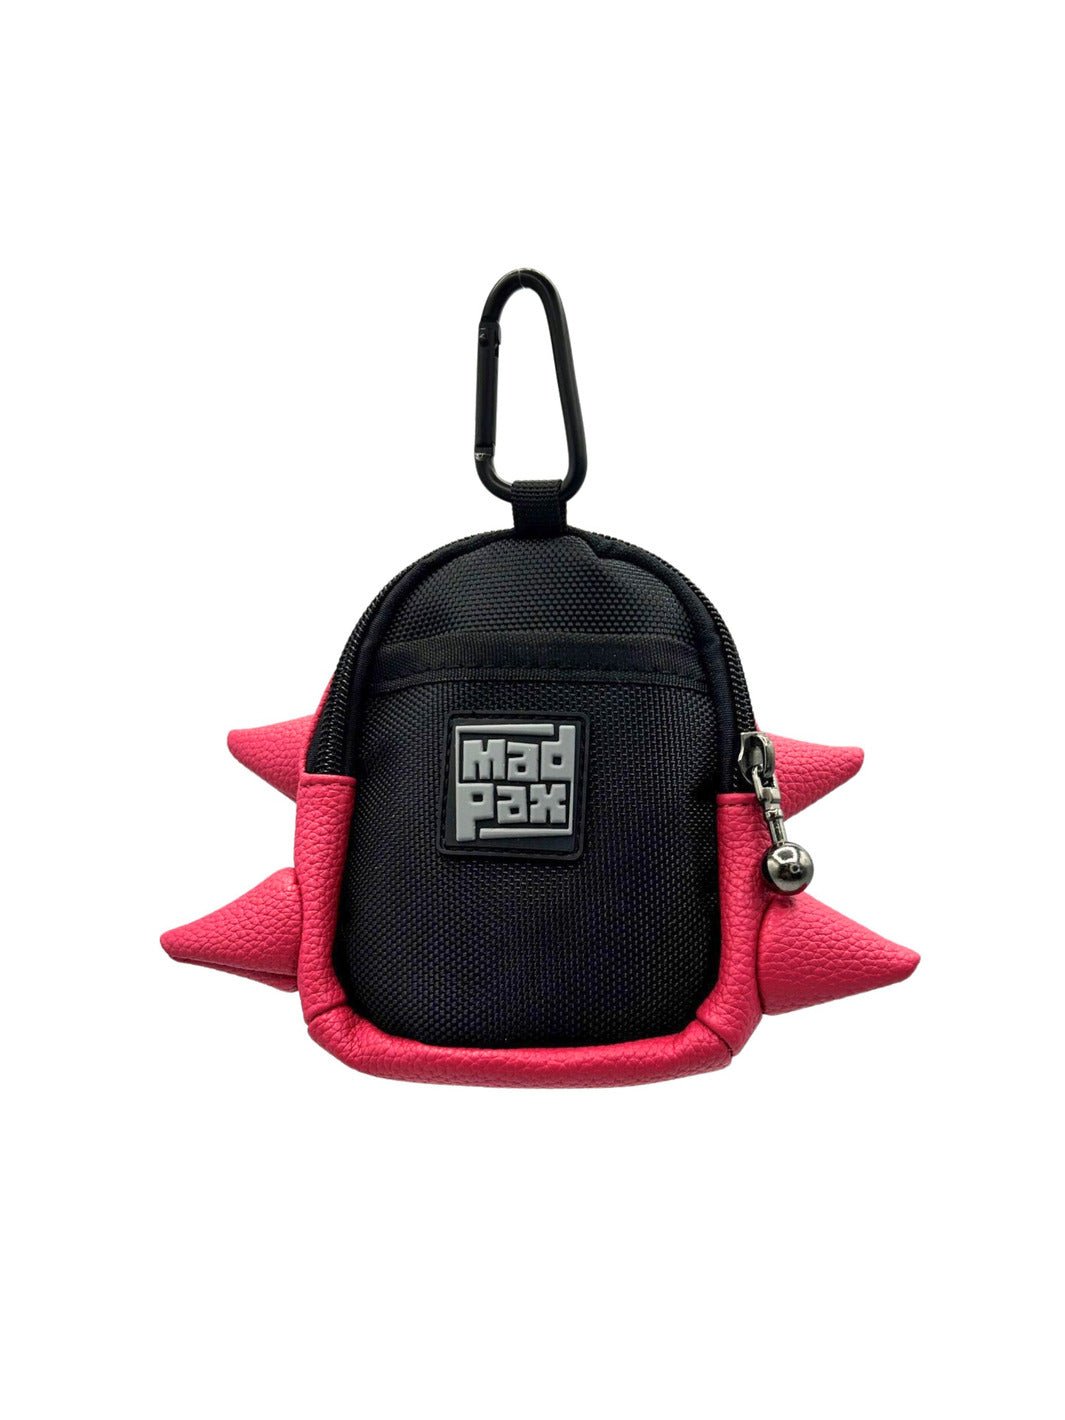 Think Pink - Clip On Bag - Madpax